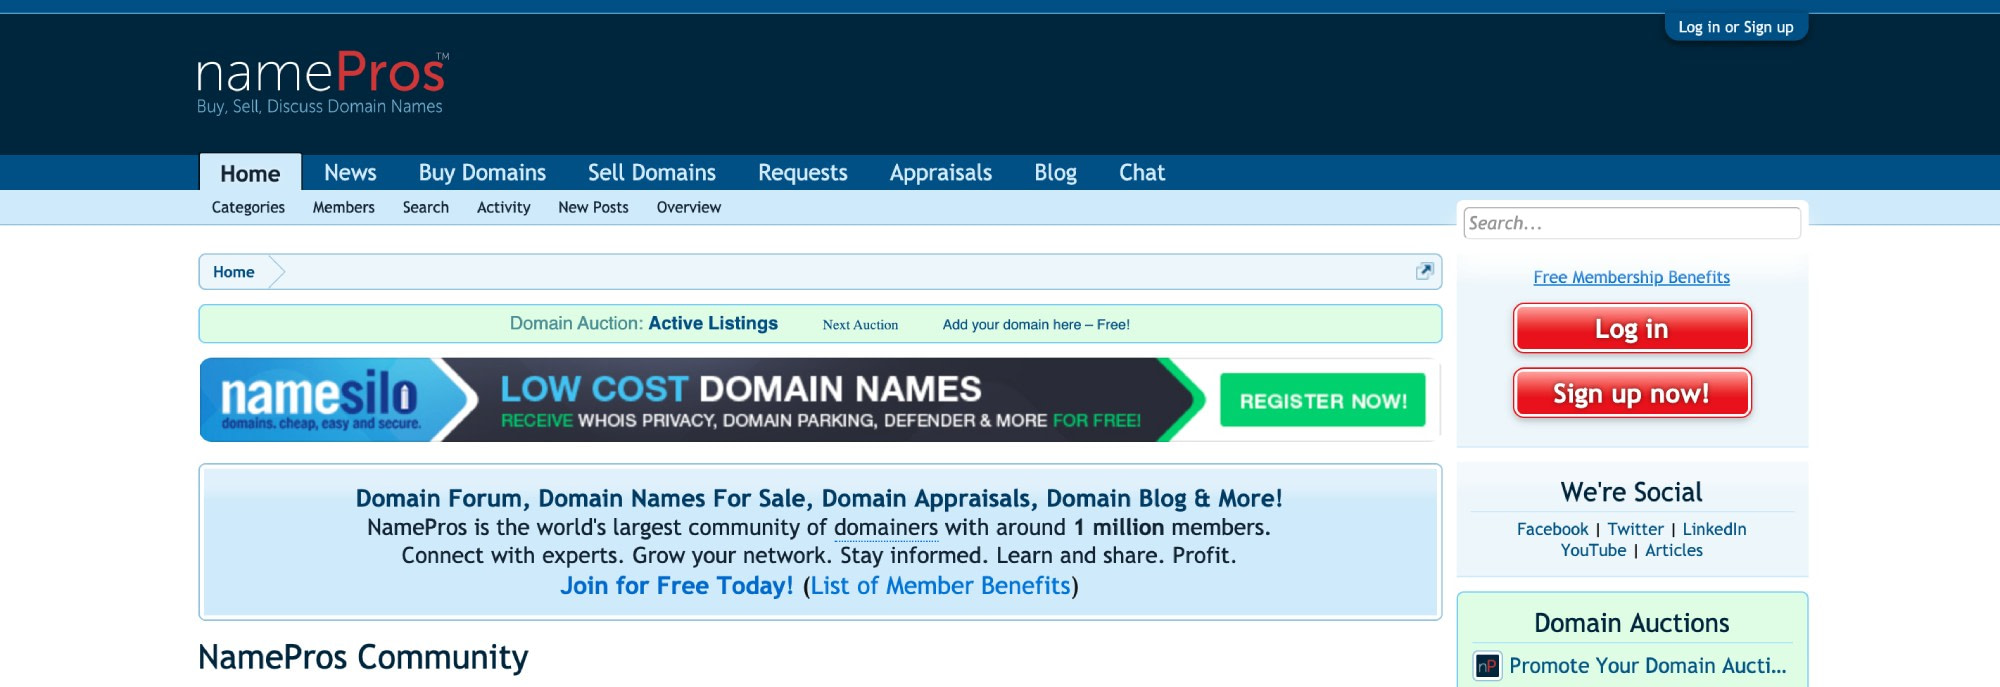 The NamePros website is topnotch premium domain name marketplace.